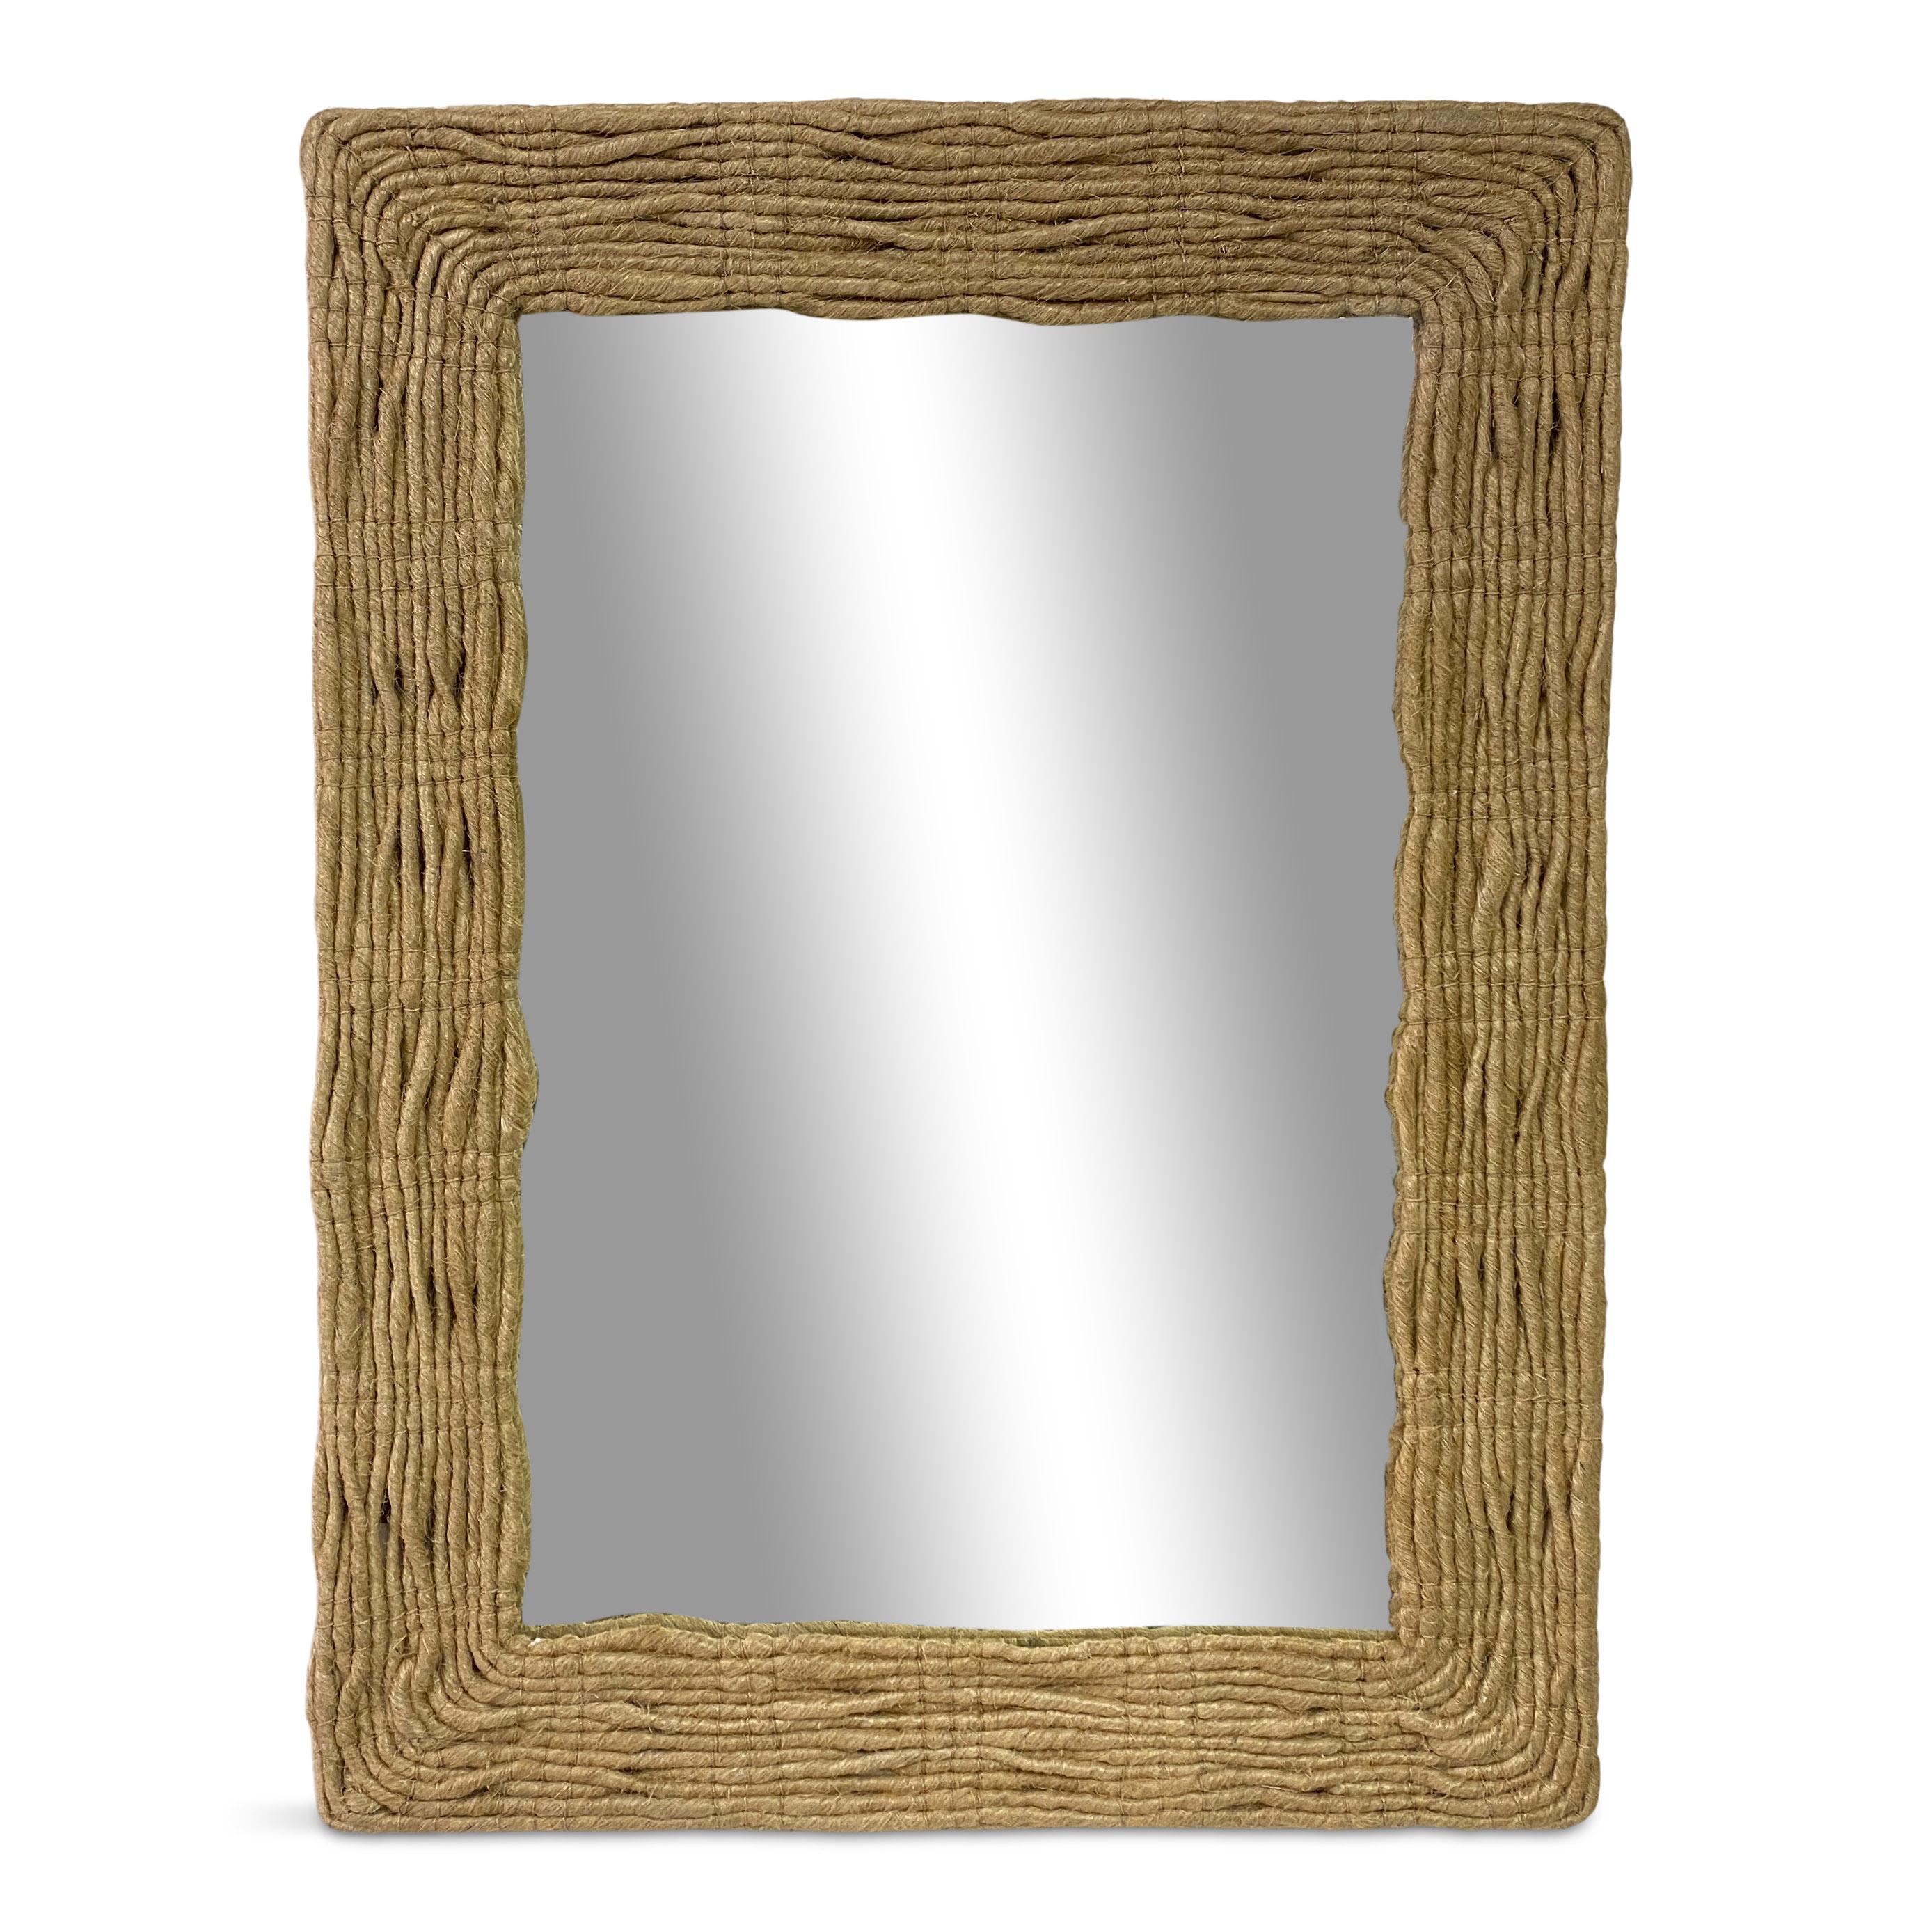 Rectangular mirror

By Made Goods

Woven strands of abaca form the frame

Neutral colour

New - two available
